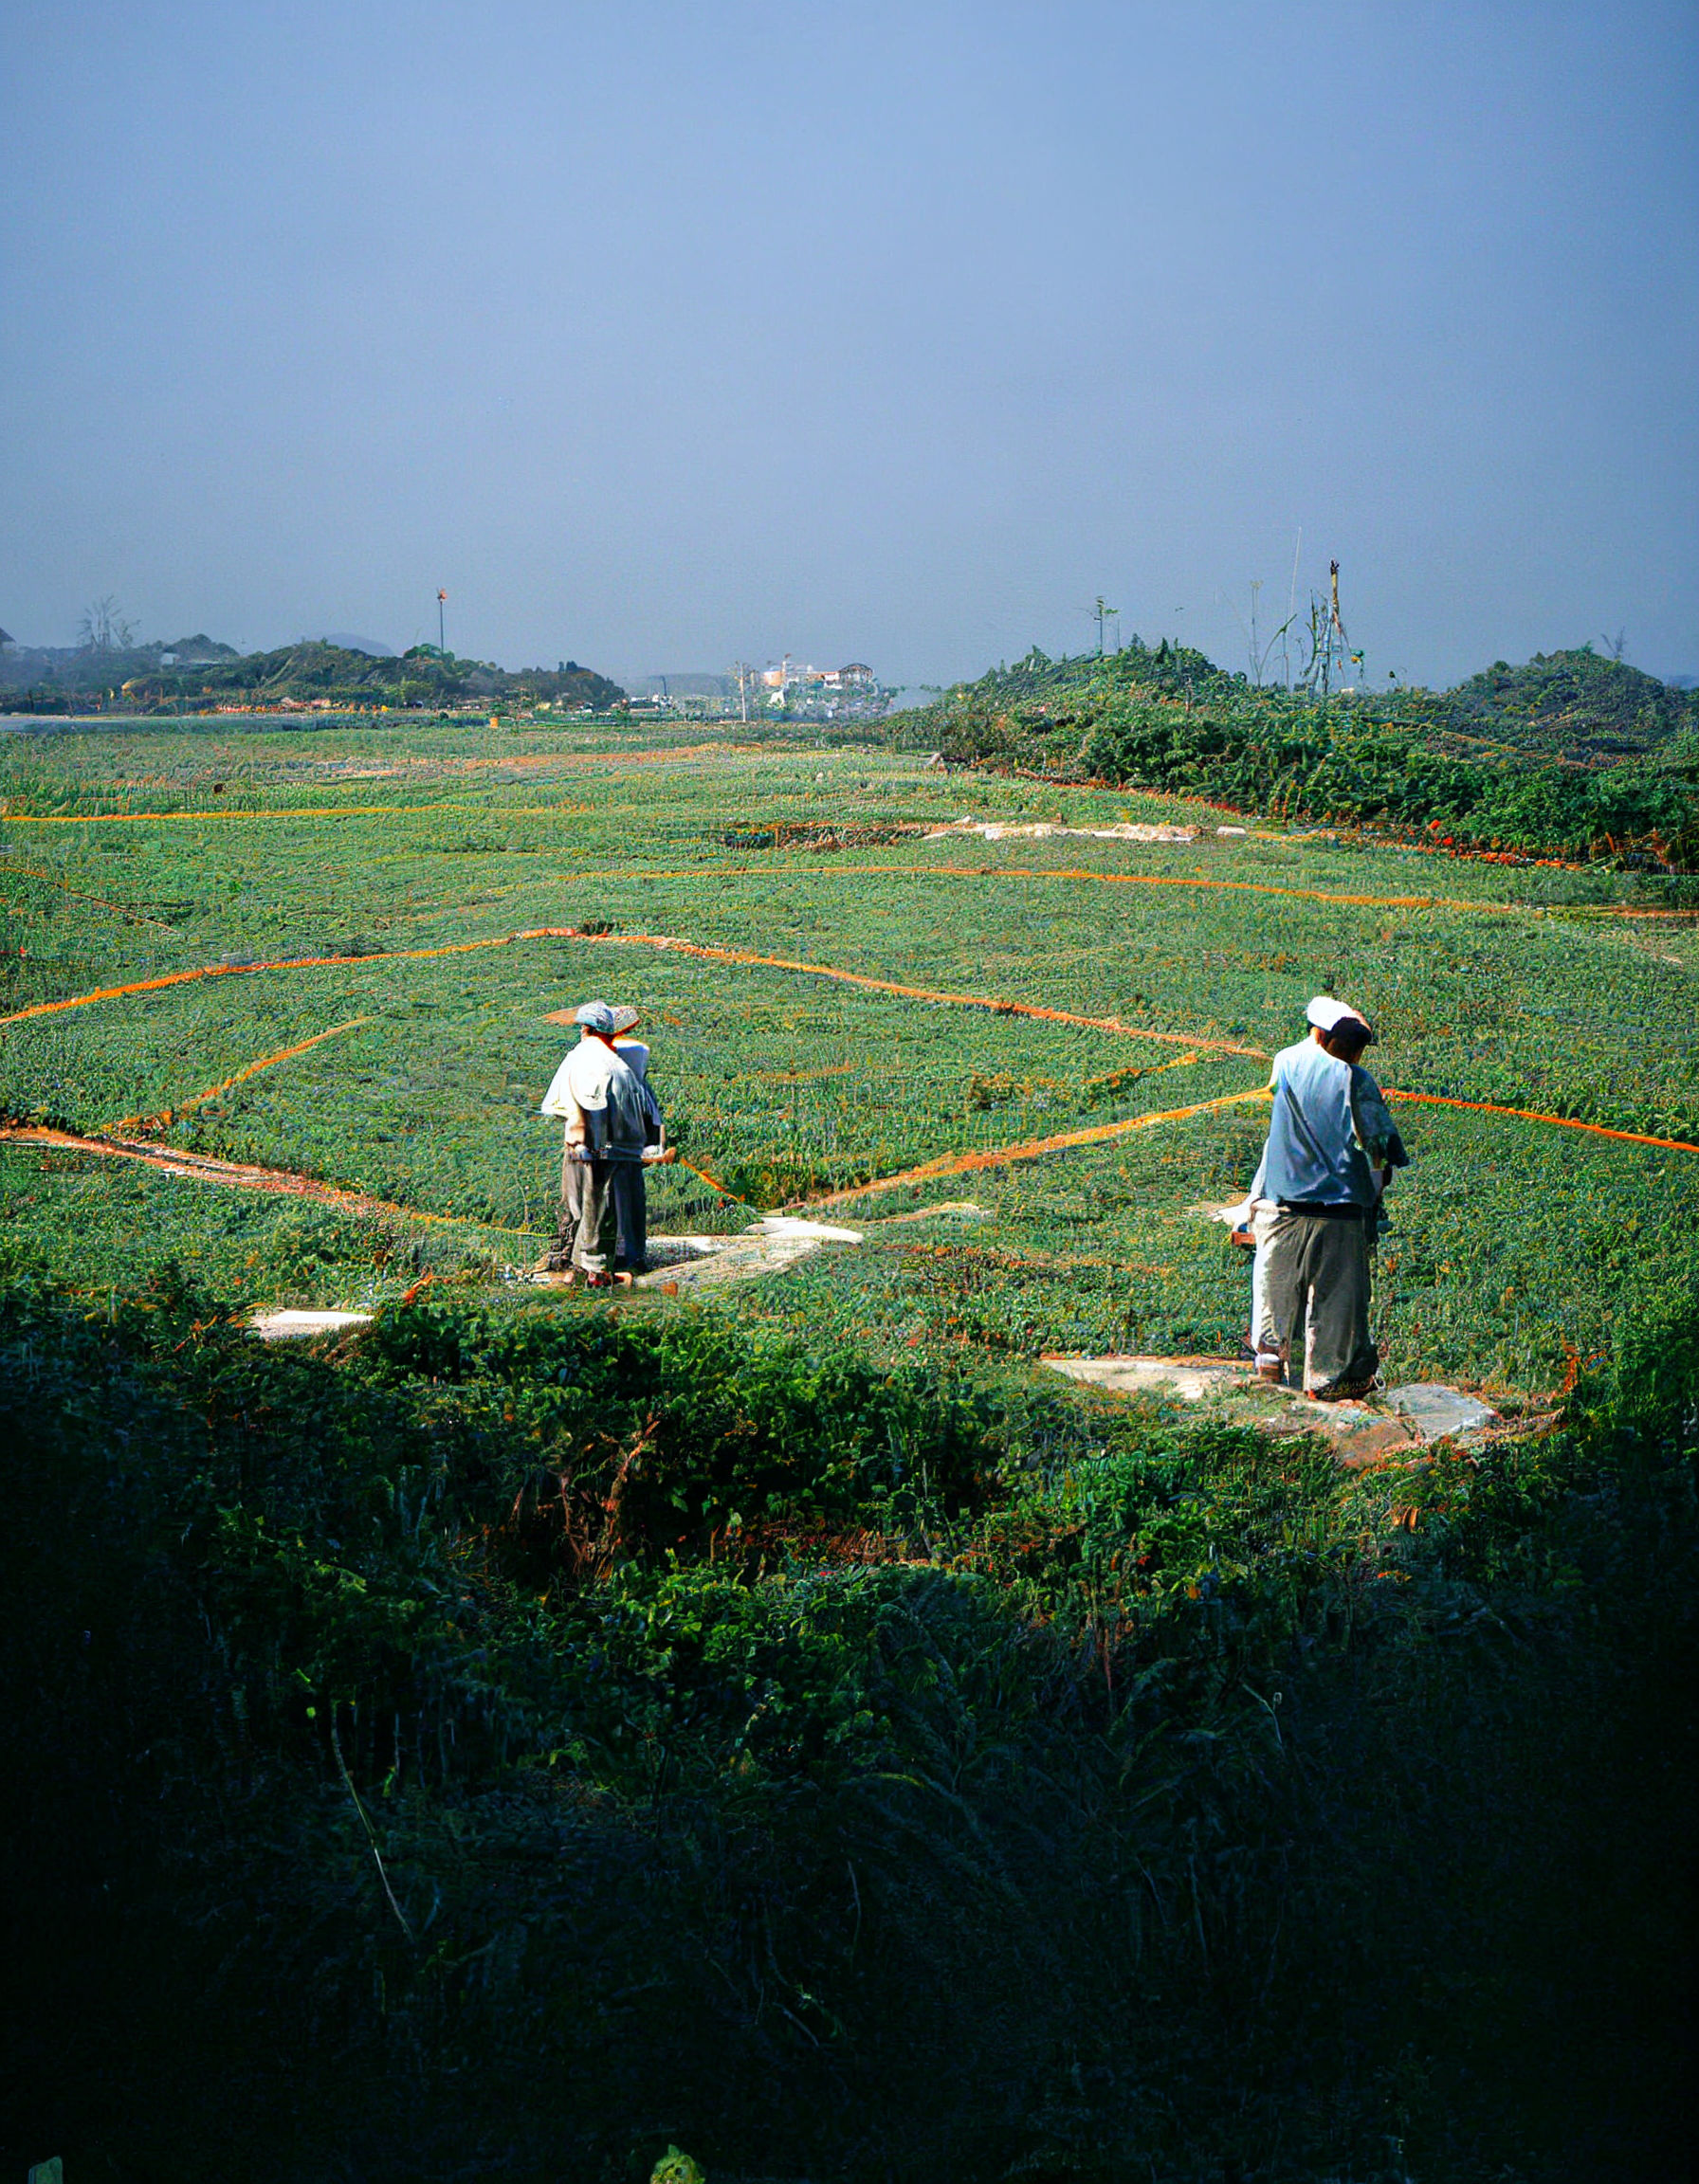 Tan Chui Mui, "a photo shot in 2004 in Kinmen Island of two men determining boundary of two sorghum fields --ar 3:4--upbeta", 2022. Digital image, generated by Midjourney AI